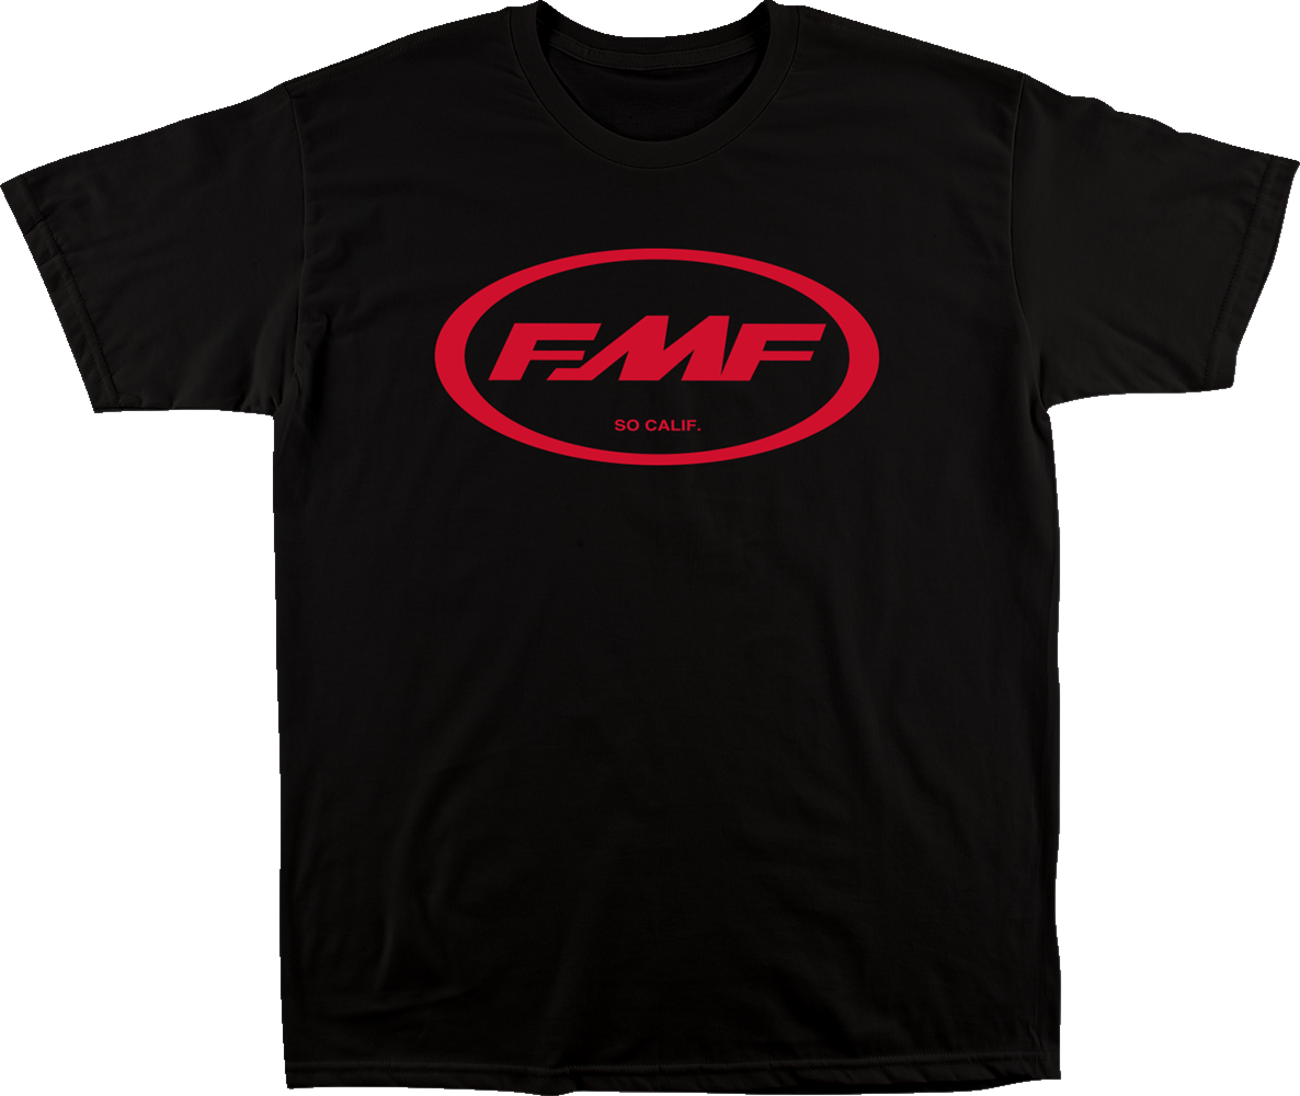 FMF Factory Classic Don T-Shirt - Black/Red - Large SP23118918BLRL 3030-23119